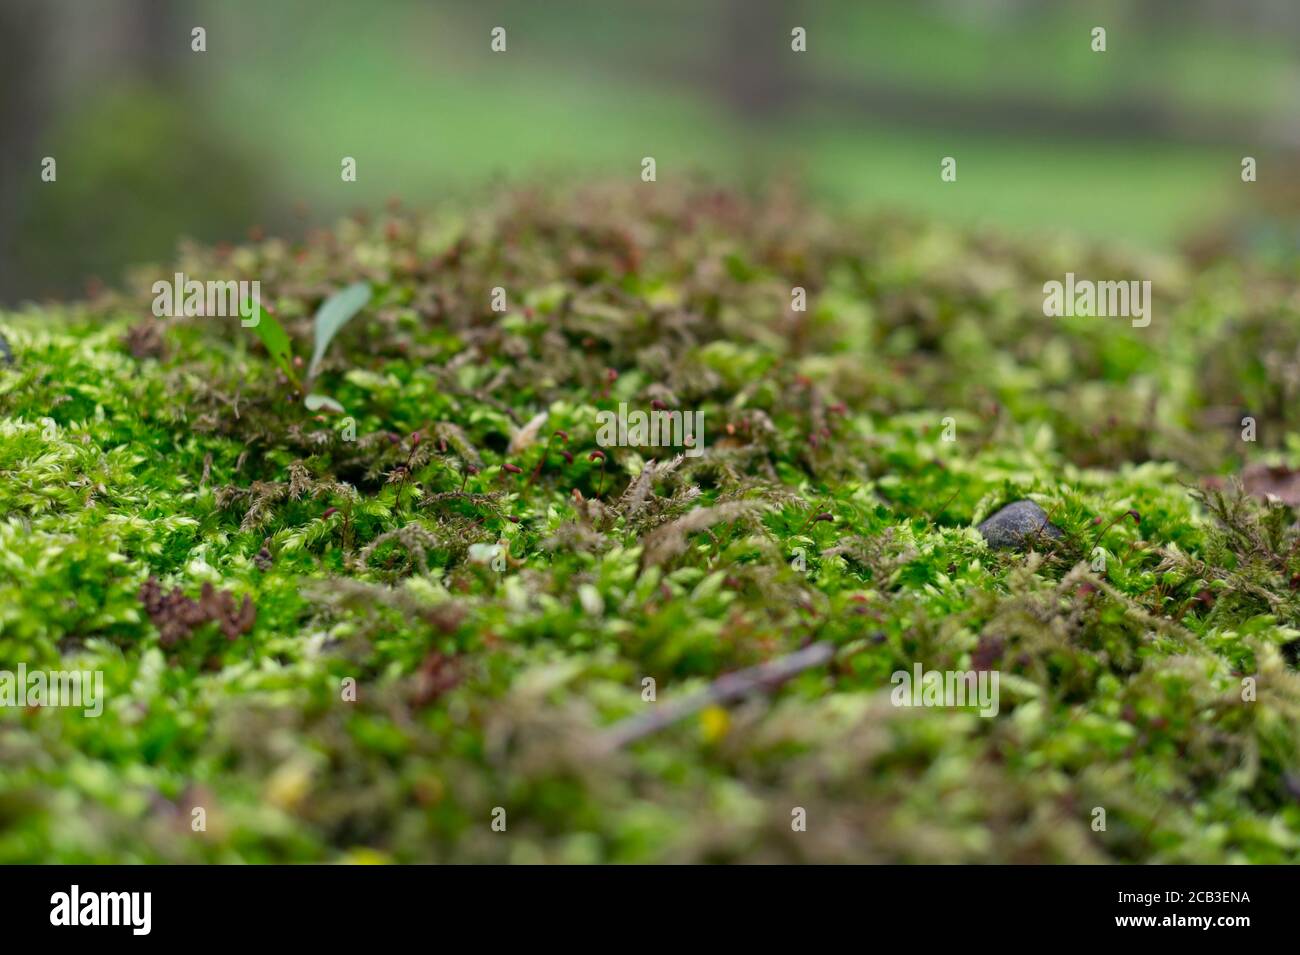 Natural detail - moss. Macro detail of fresh green plant and vegetation on forestland Stock Photo